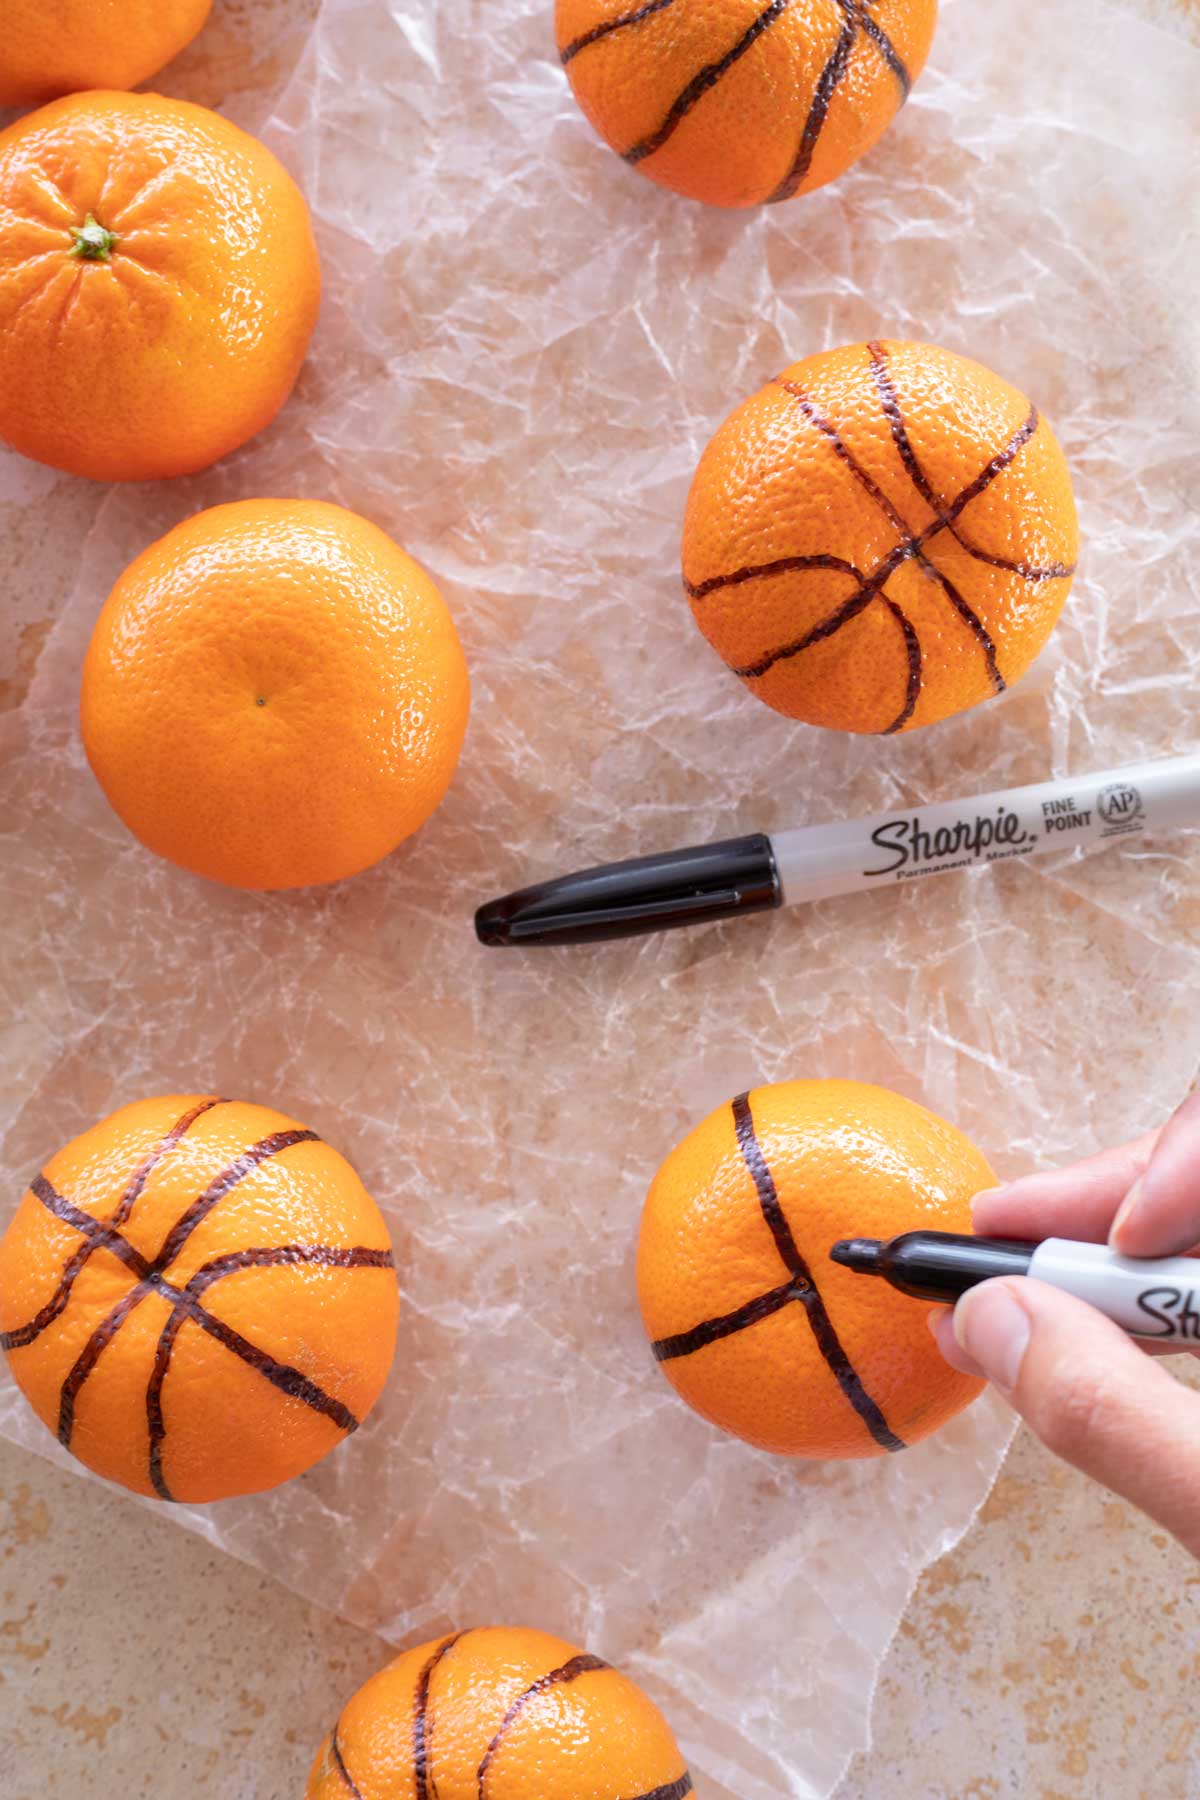 Fingers holding Sharpie to draw lines on clementine to look like a basketball.